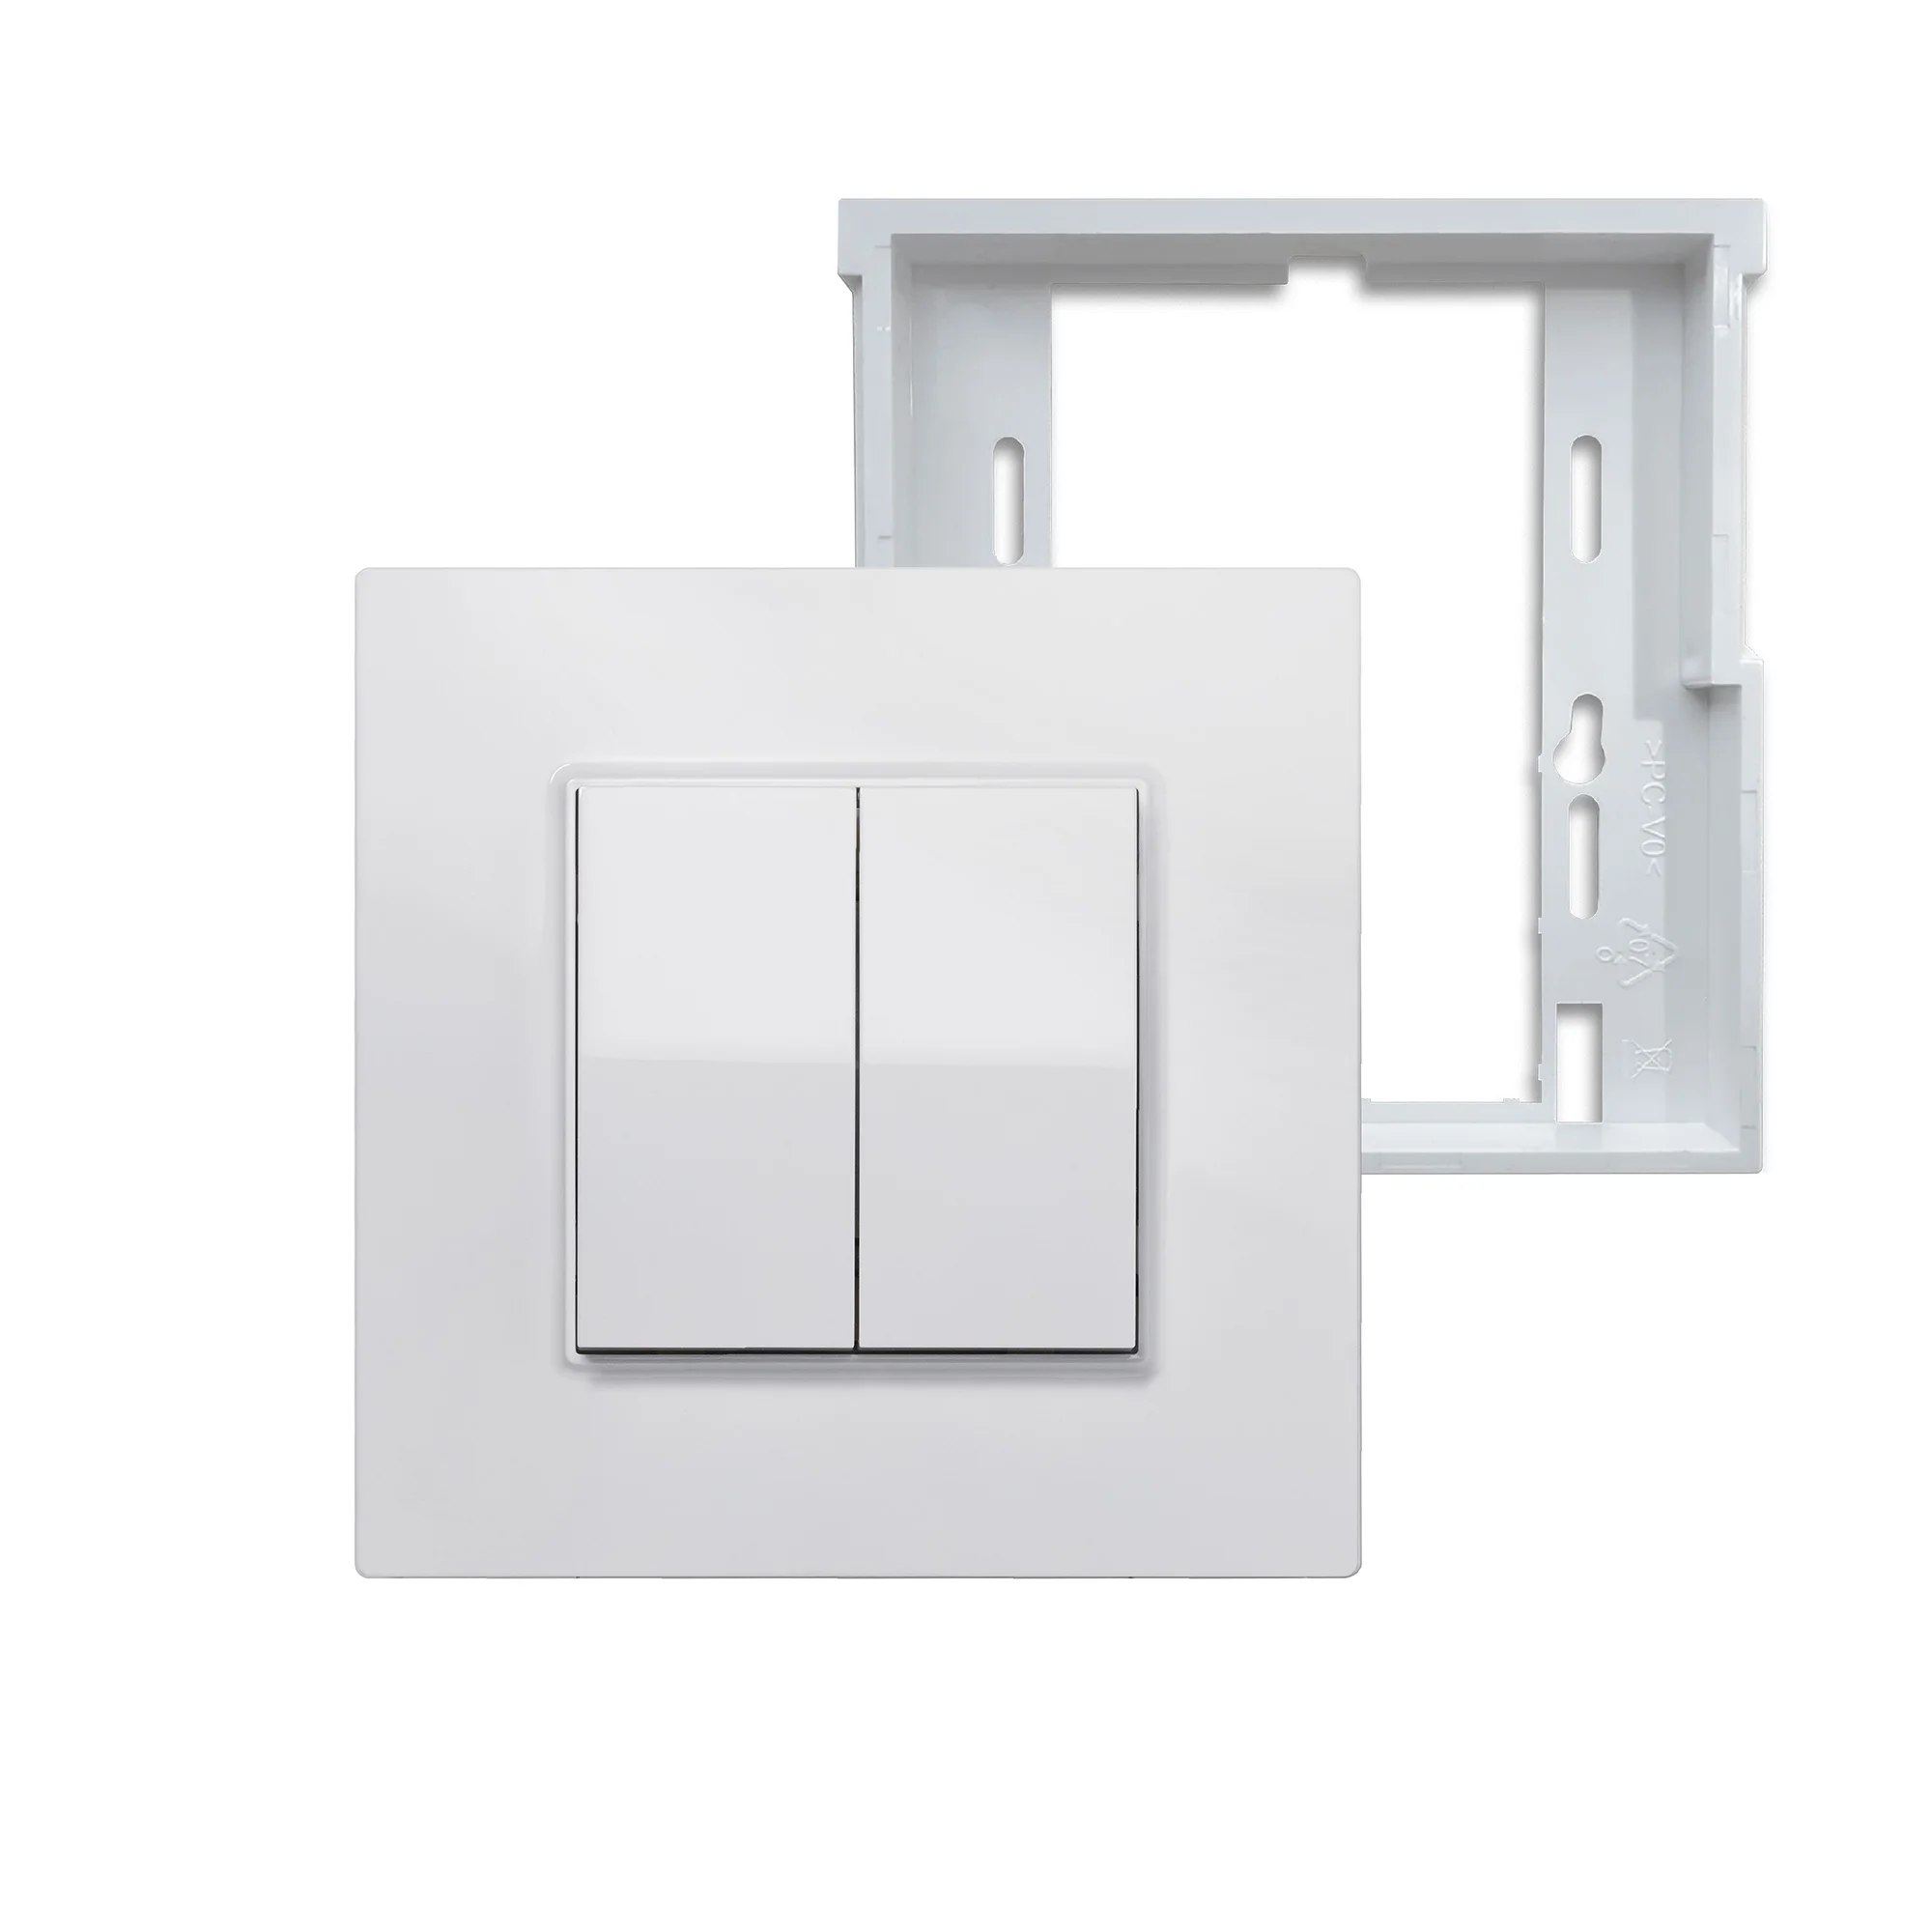 Friends of Hue Switch with cover frame